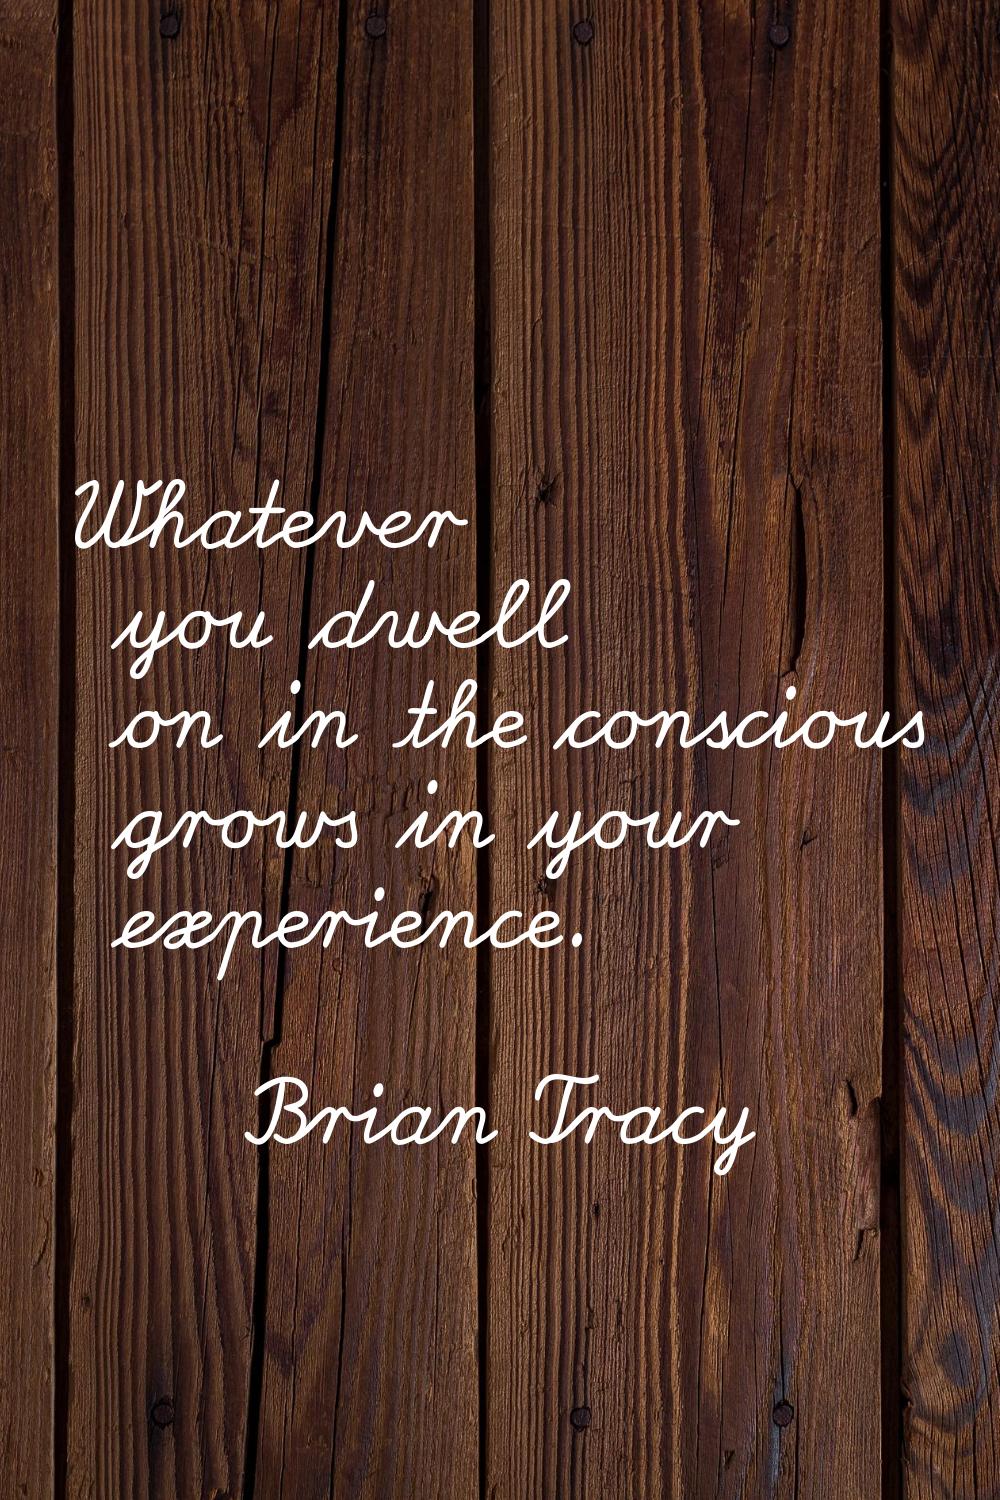 Whatever you dwell on in the conscious grows in your experience.